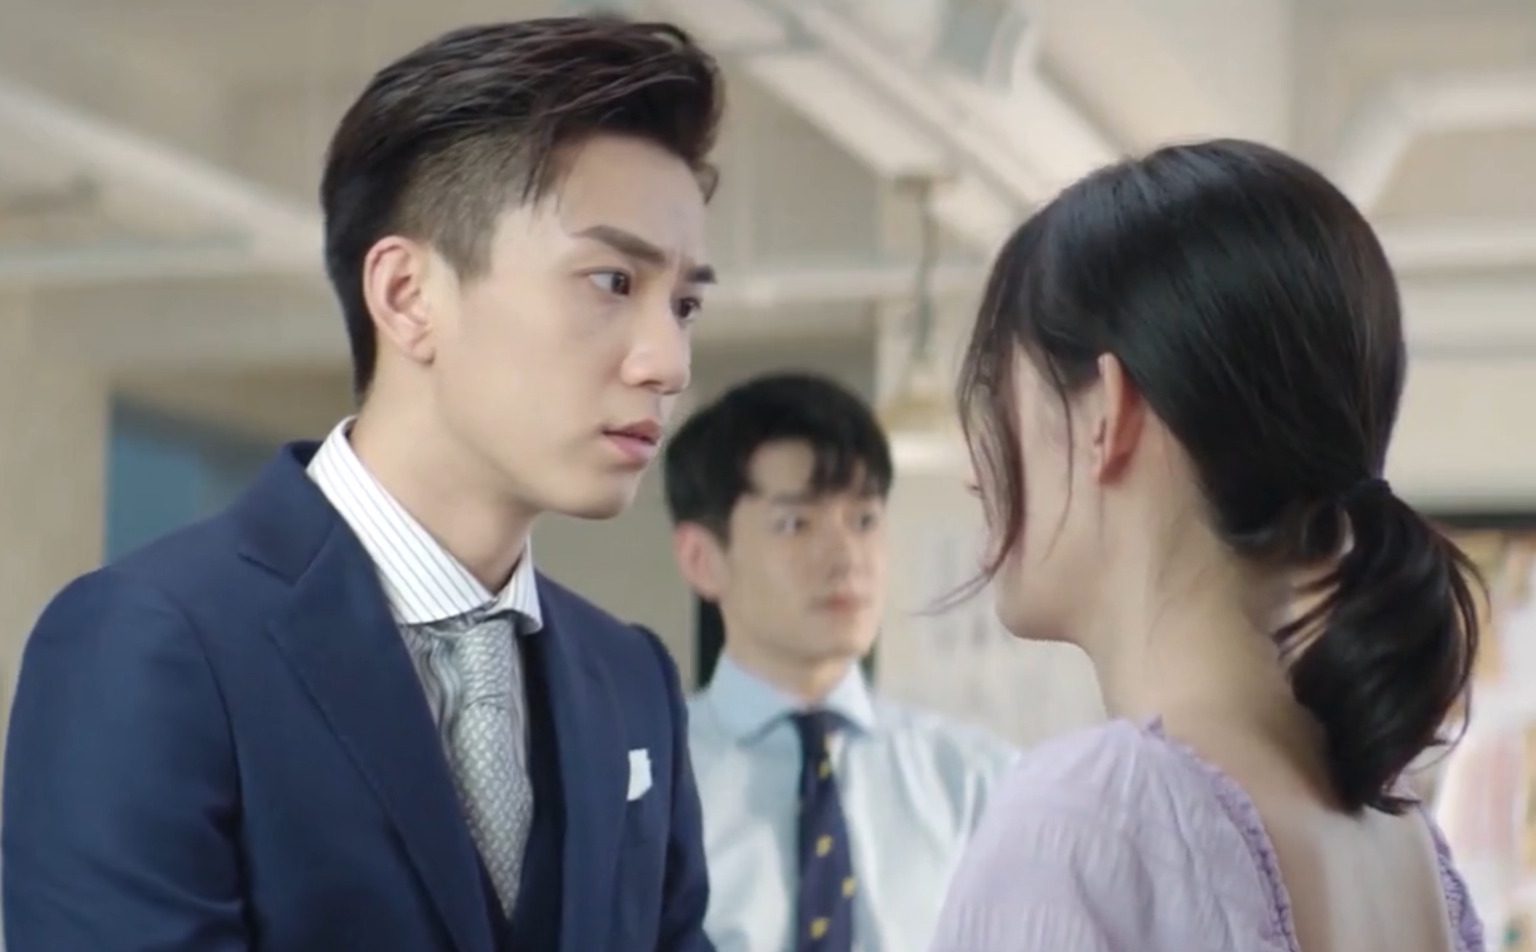 'Once We Get Married' Episode 24